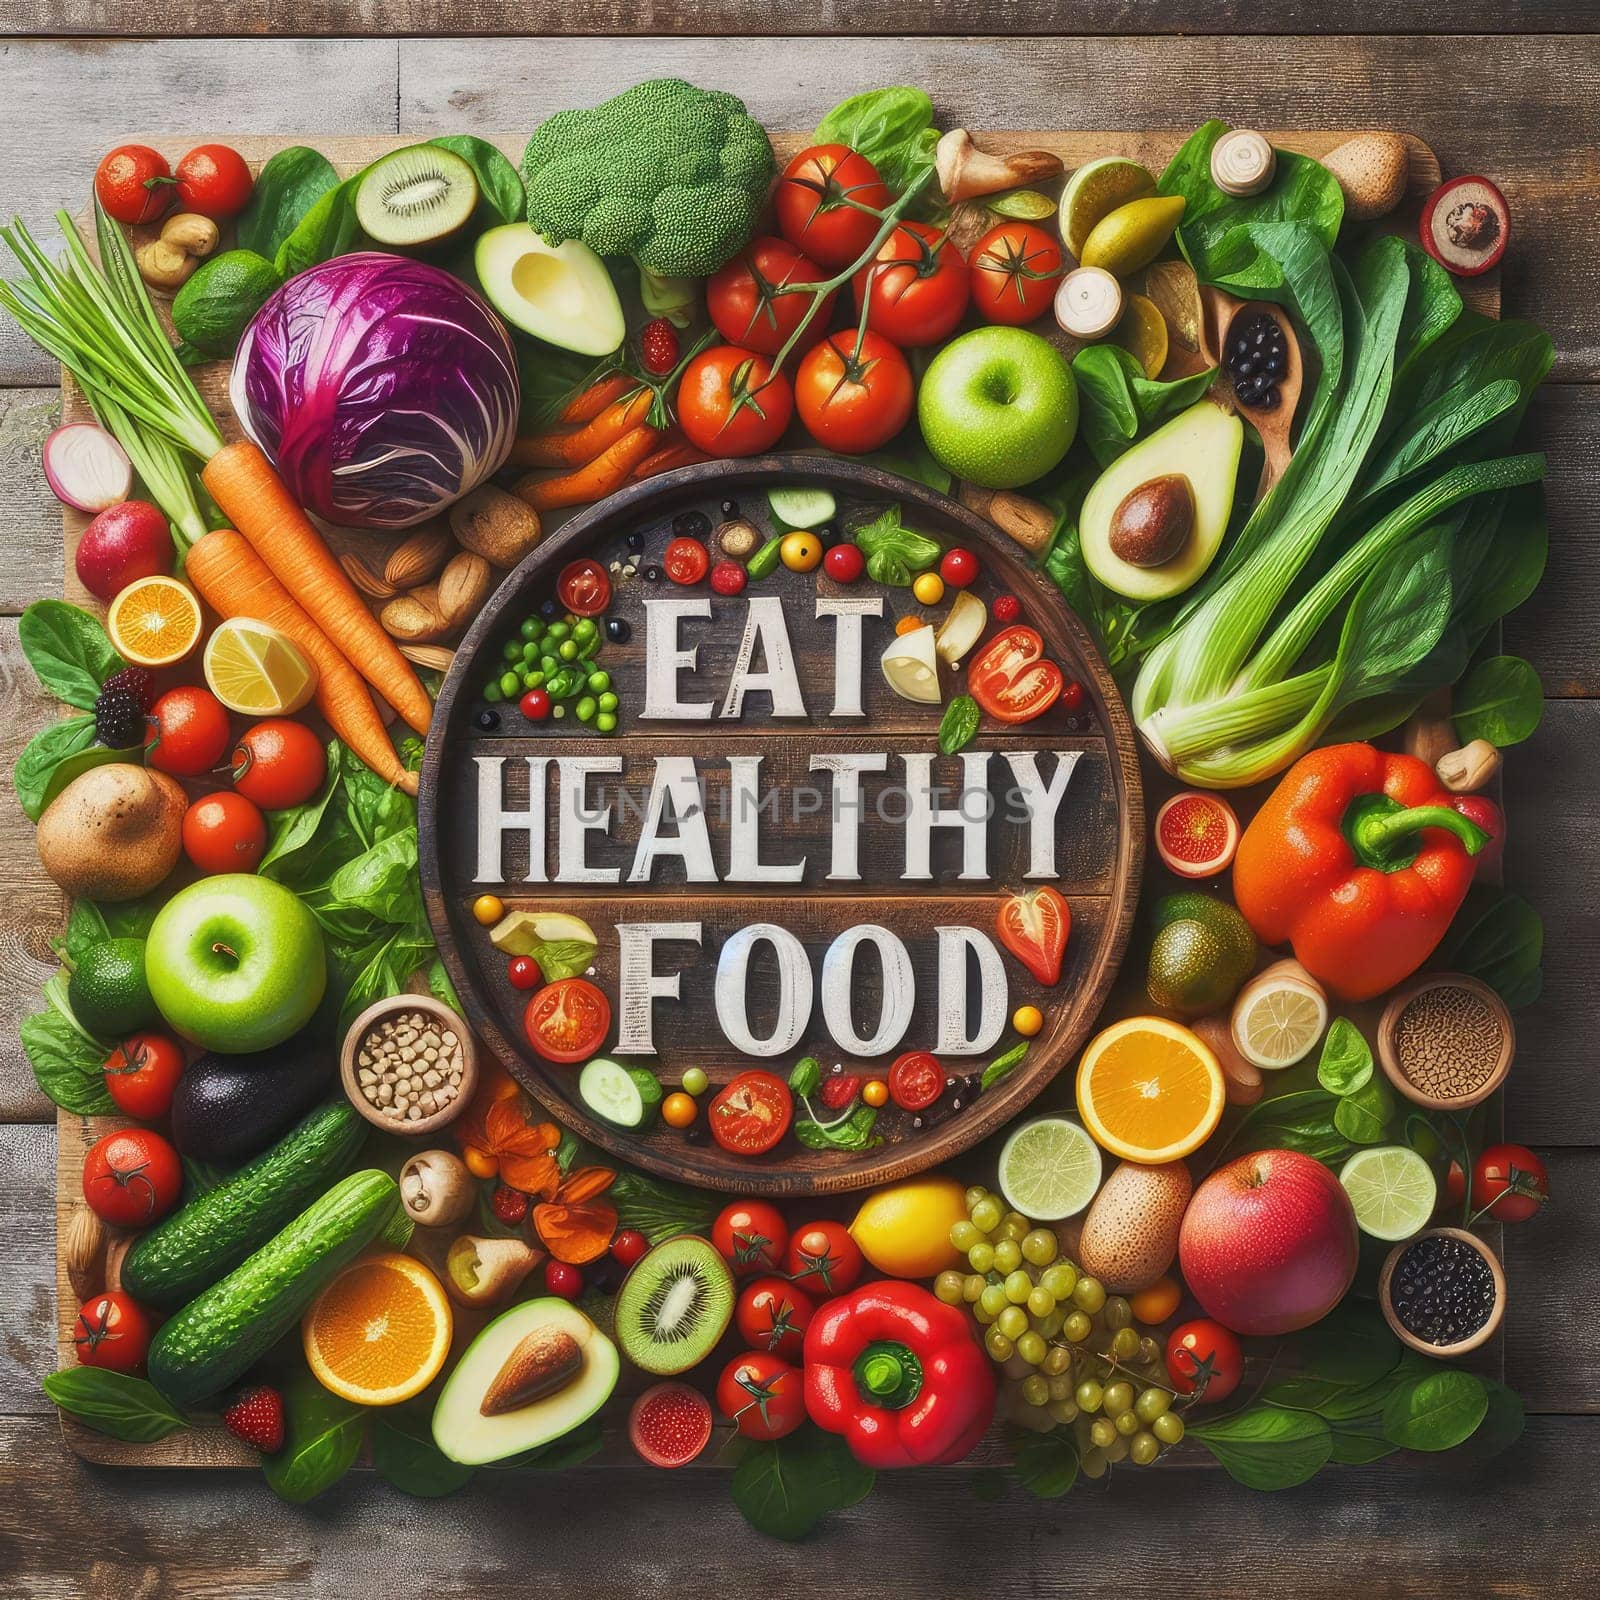 Words: Eat healthy food. made with organic vegetables and fruits on wooden rustic table.